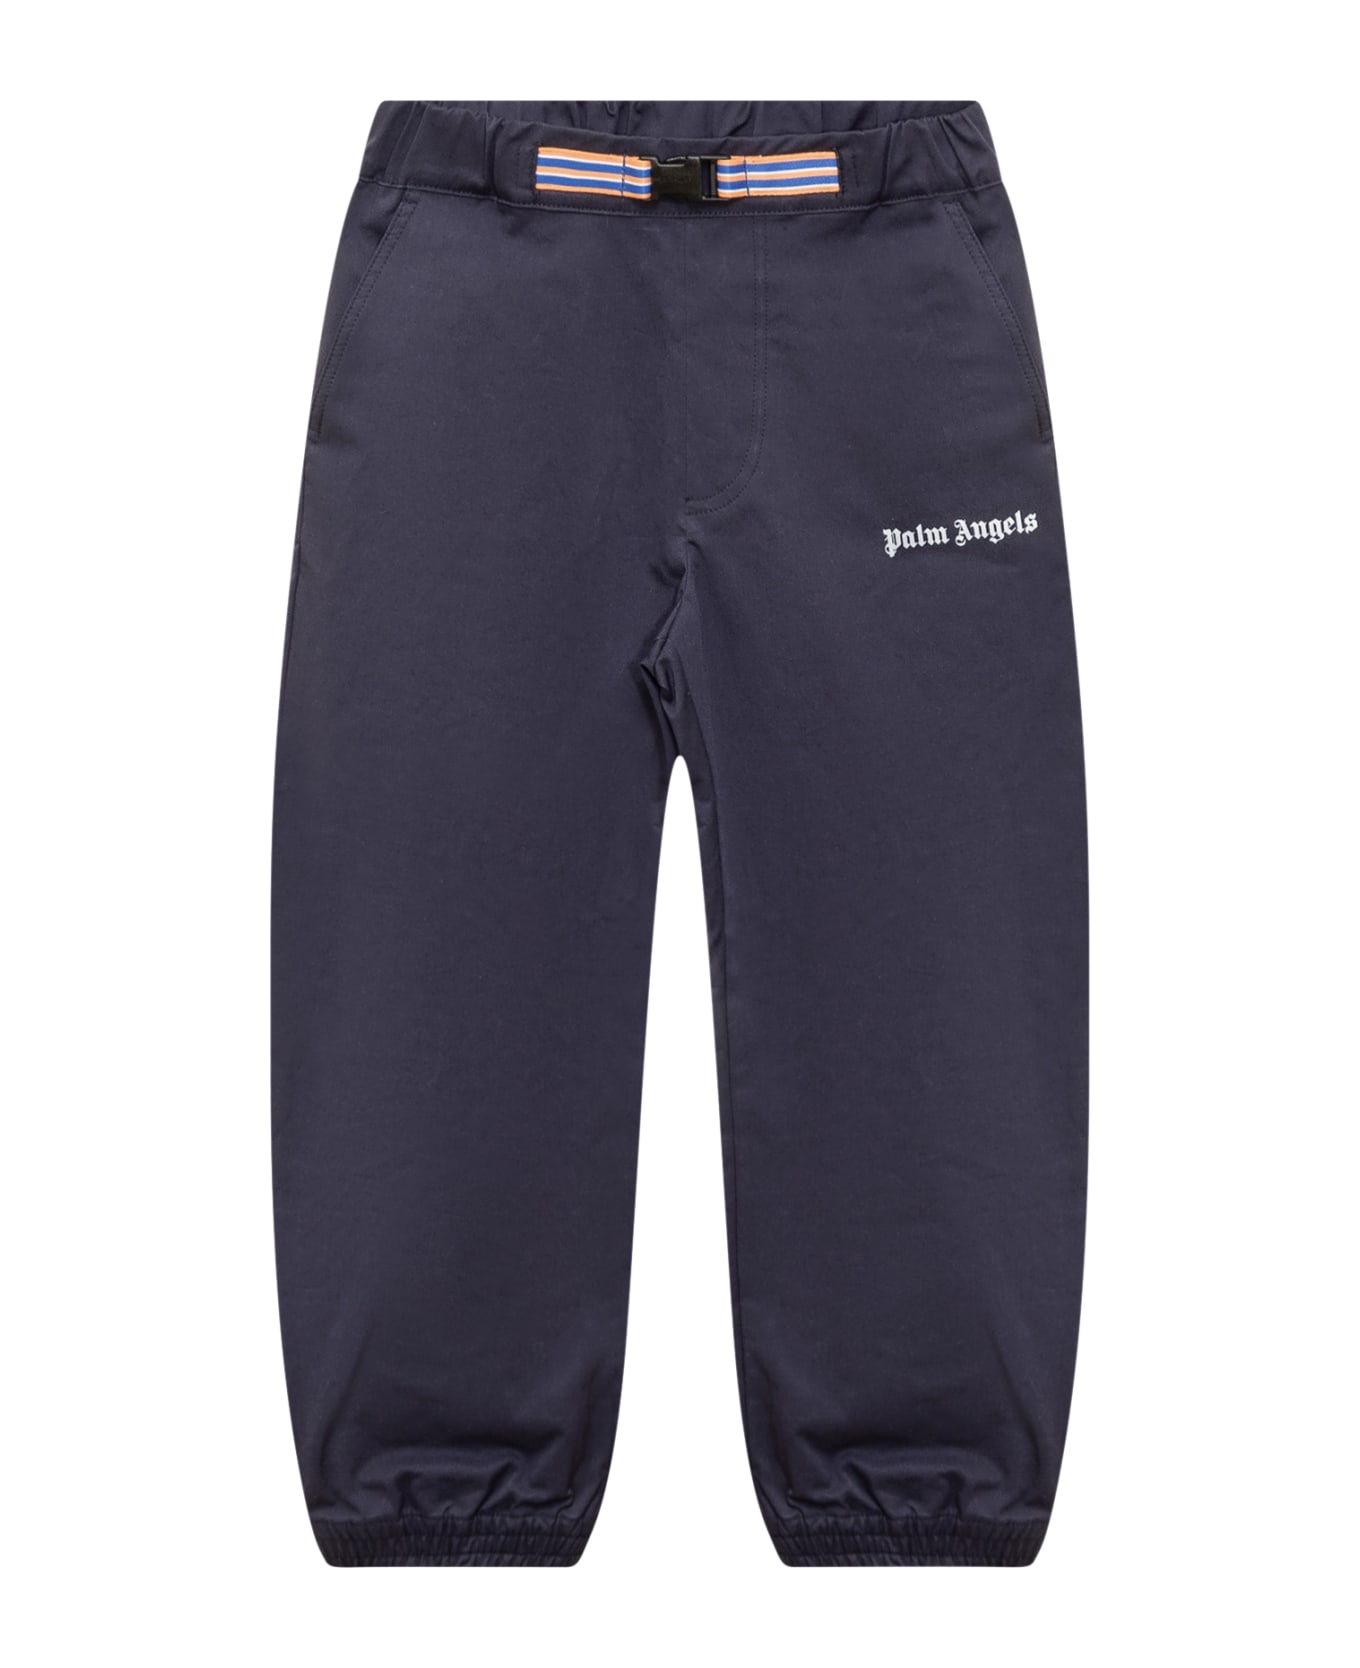 Palm Angels Trousers With Logo - NAVY BLUE ボトムス